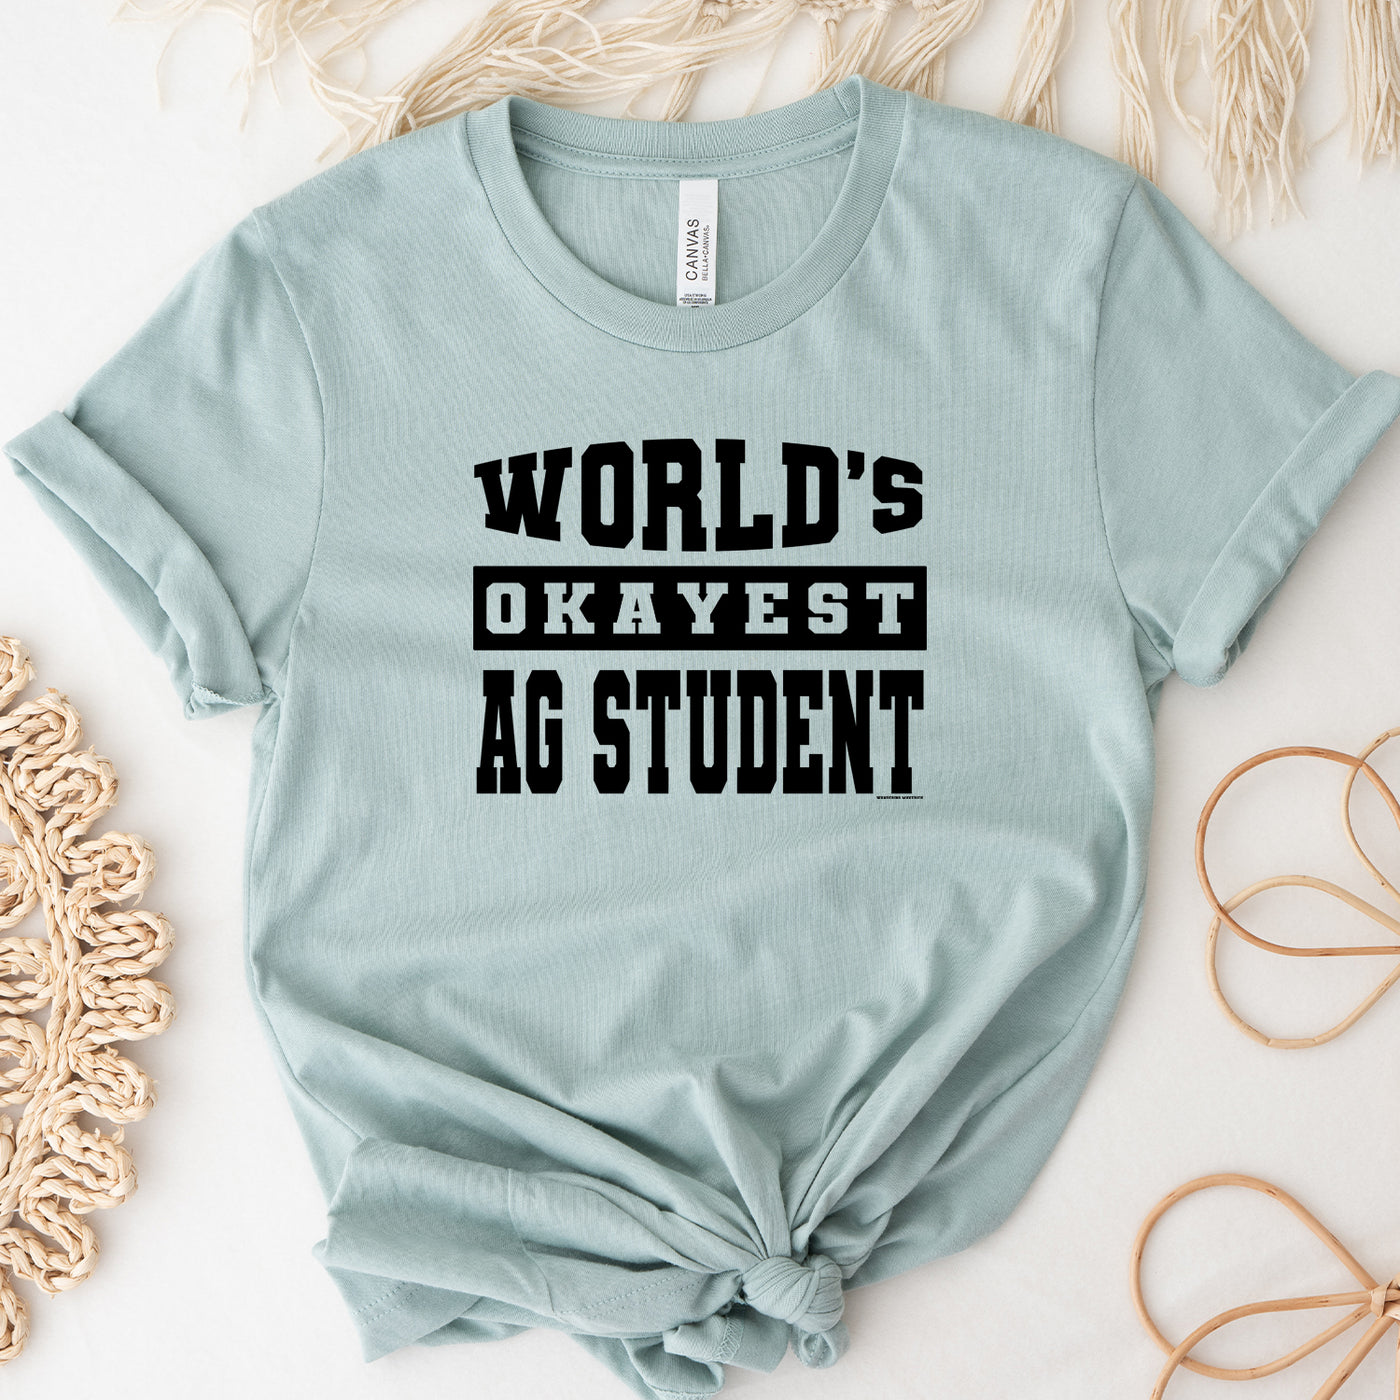 World's Okayest Ag Student T-Shirt (XS-4XL) - Multiple Colors!